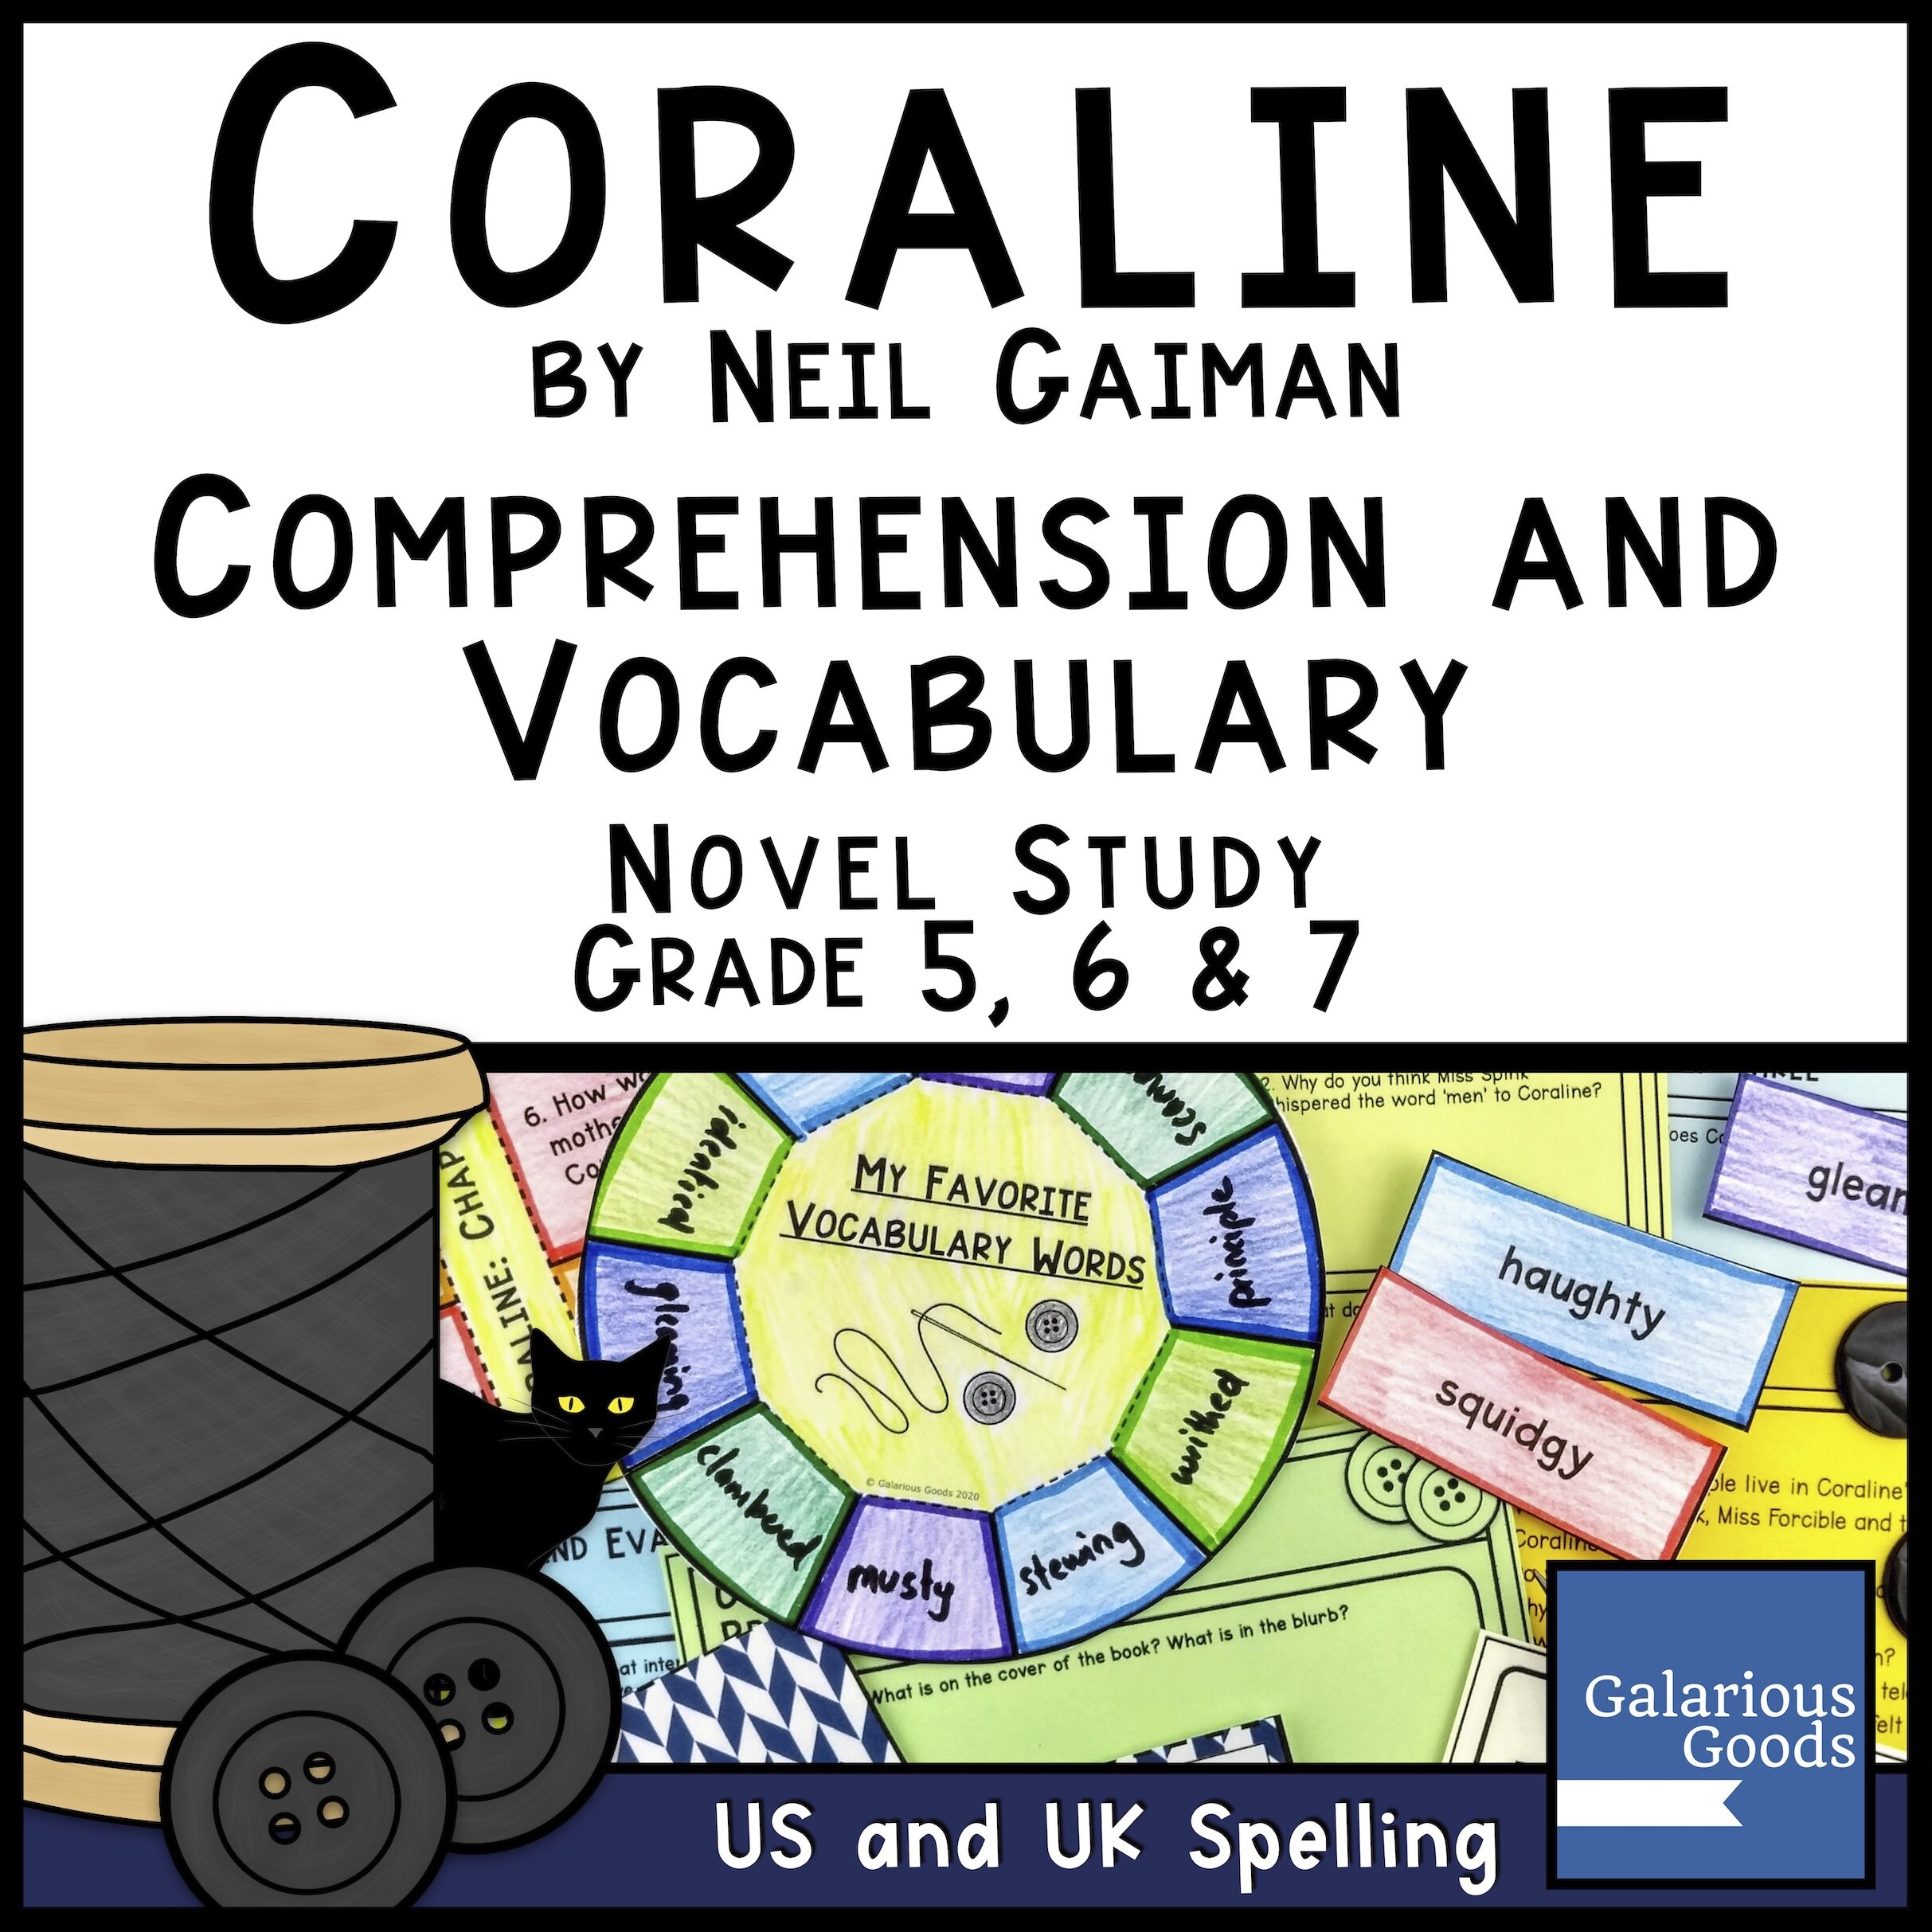 cover CORALINE comp and vocab UPDATE.jpg